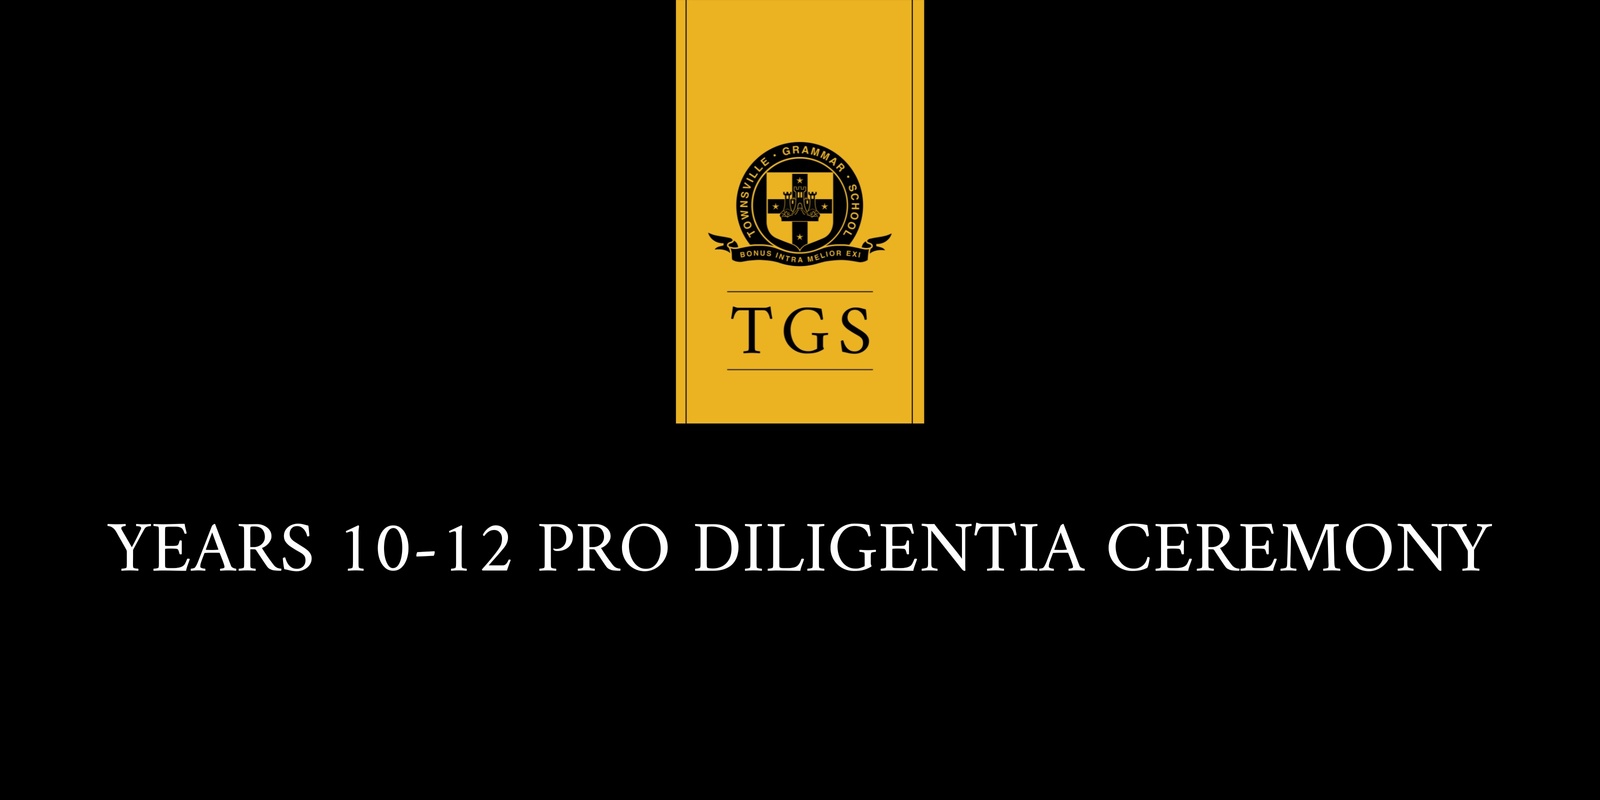 Banner image for Years 10-12 Pro Diligentia Ceremony